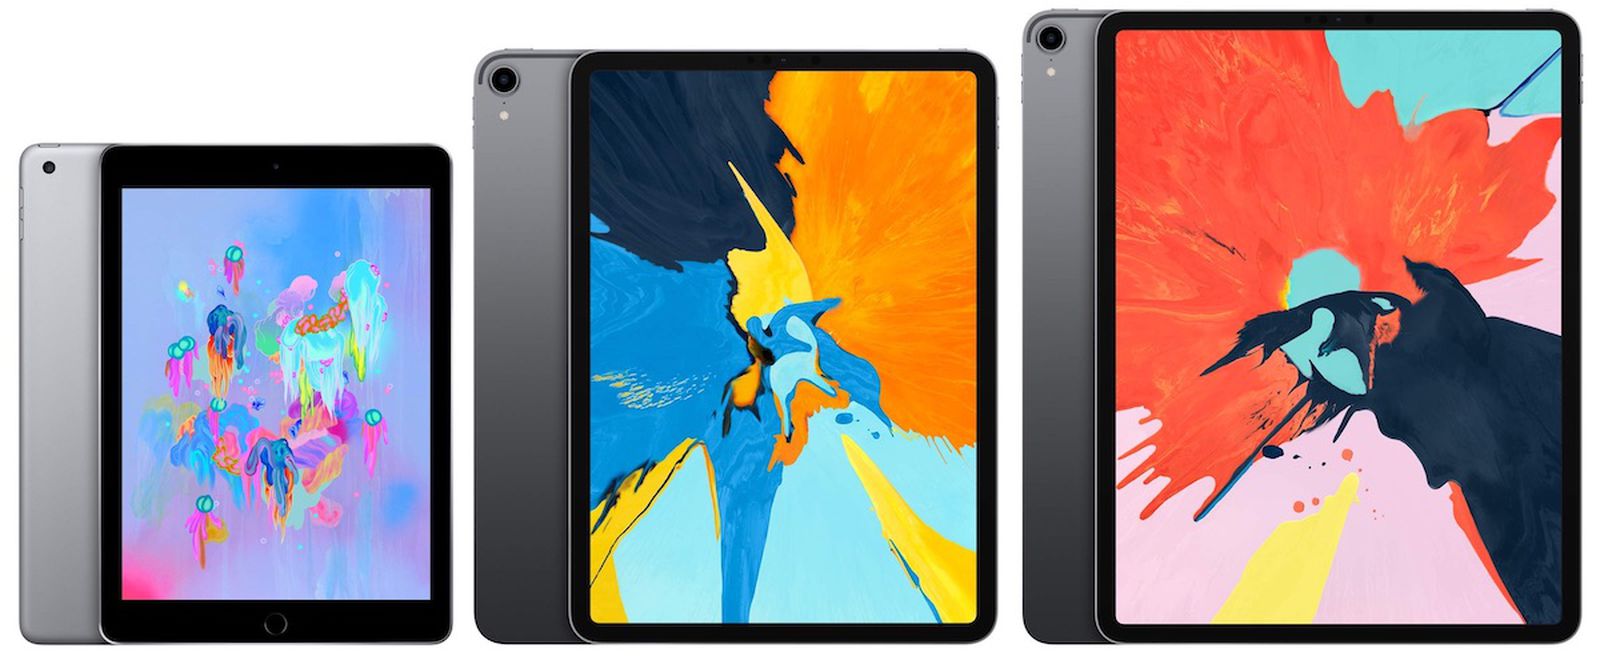 Tutorials, and Tricks for New iPad Owners - MacRumors